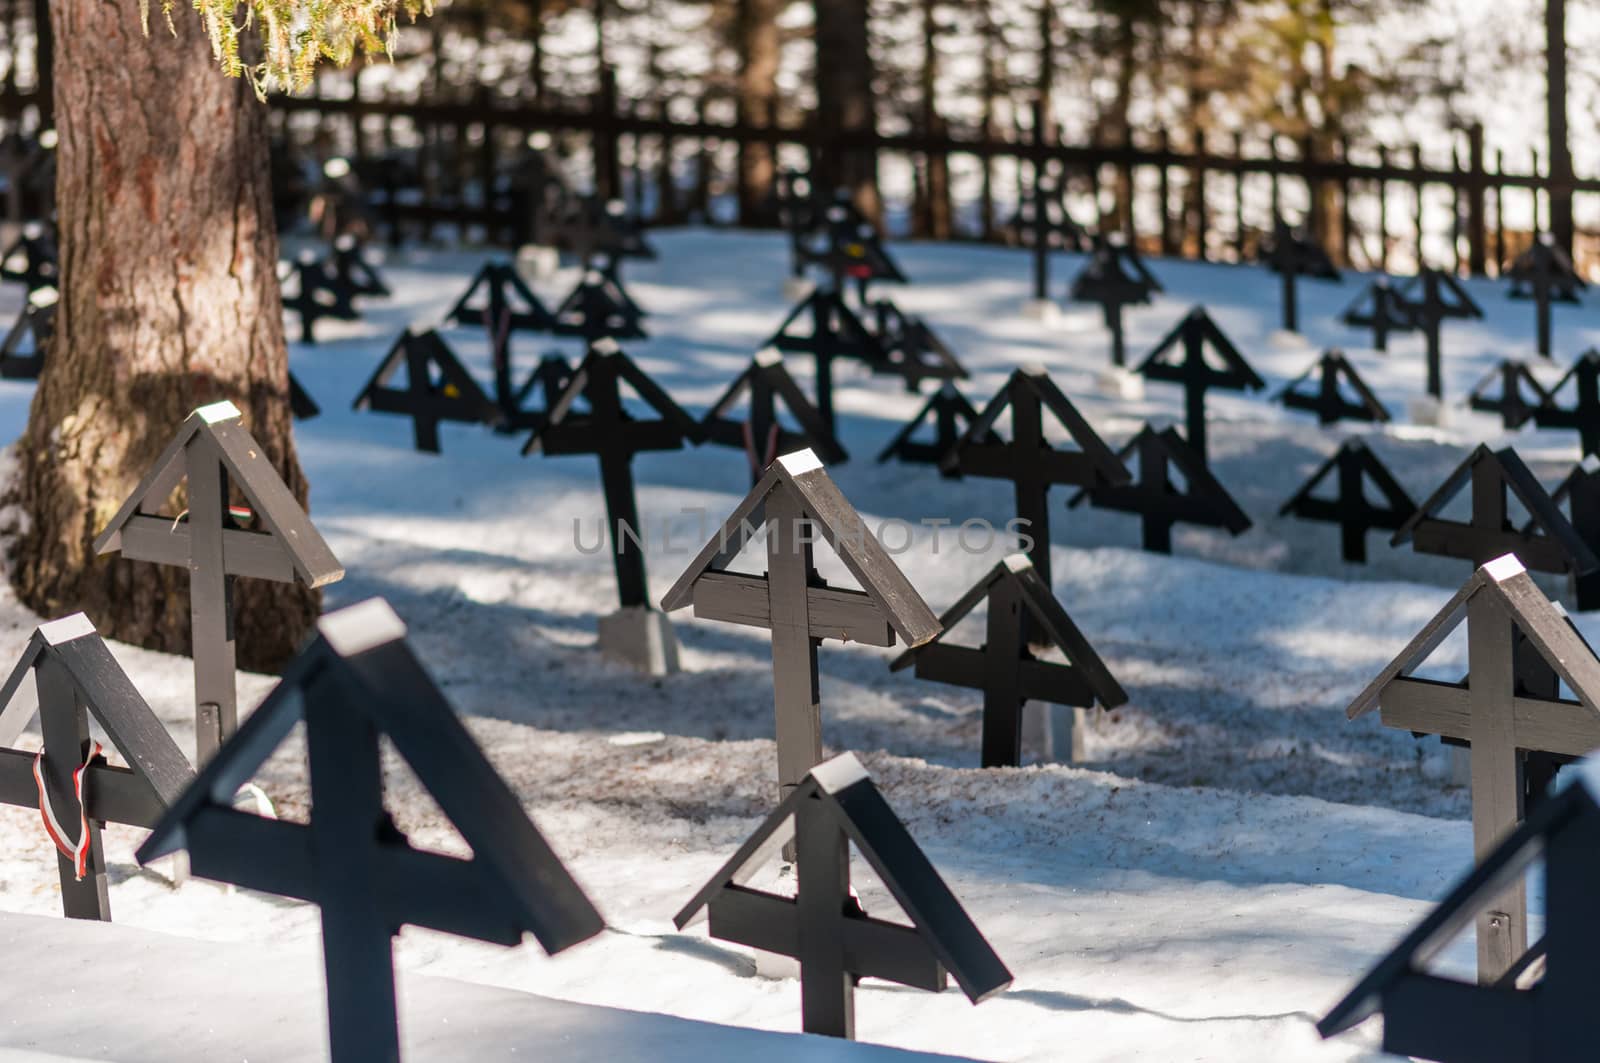 Crosses in a military cemetery of the first World War in Italy. Winter season, snow on the ground